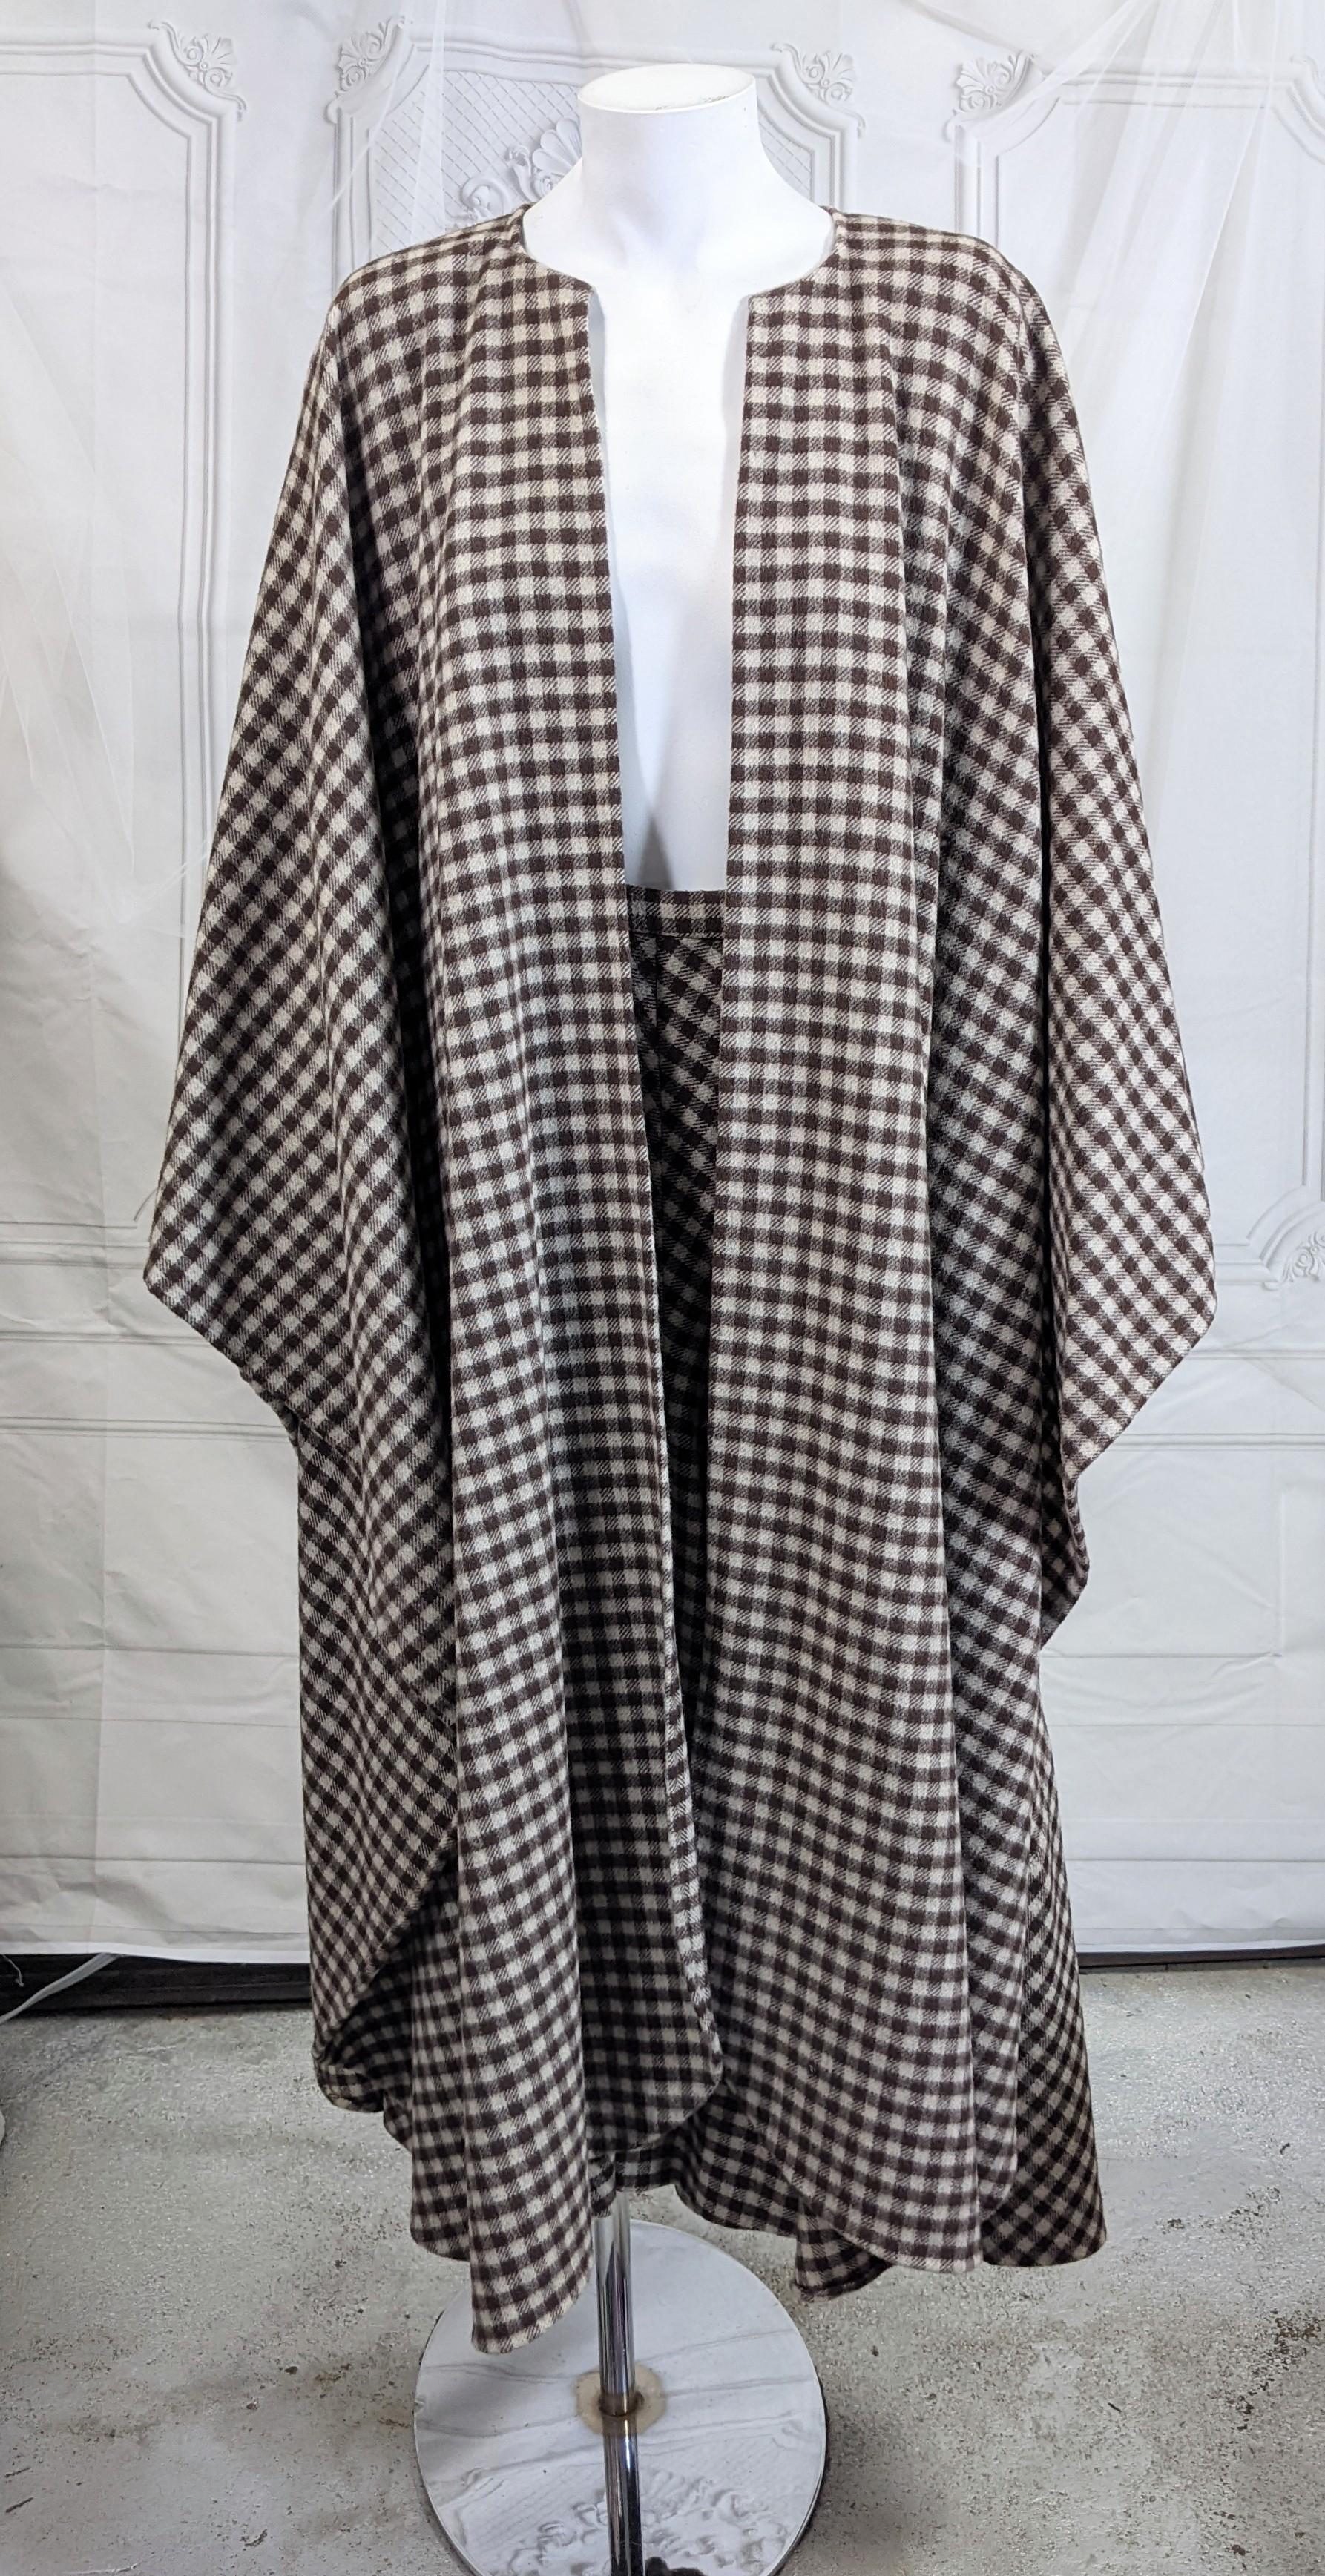 Elegant Halston Checked Wool Cape Skirt Ensemble composed of open cape and long flared skirt in a brown/beige check. Cape is simply cut with front slash opening. Bias skirt is ingeniously cut in a flared silhouette with the seaming creating fullness